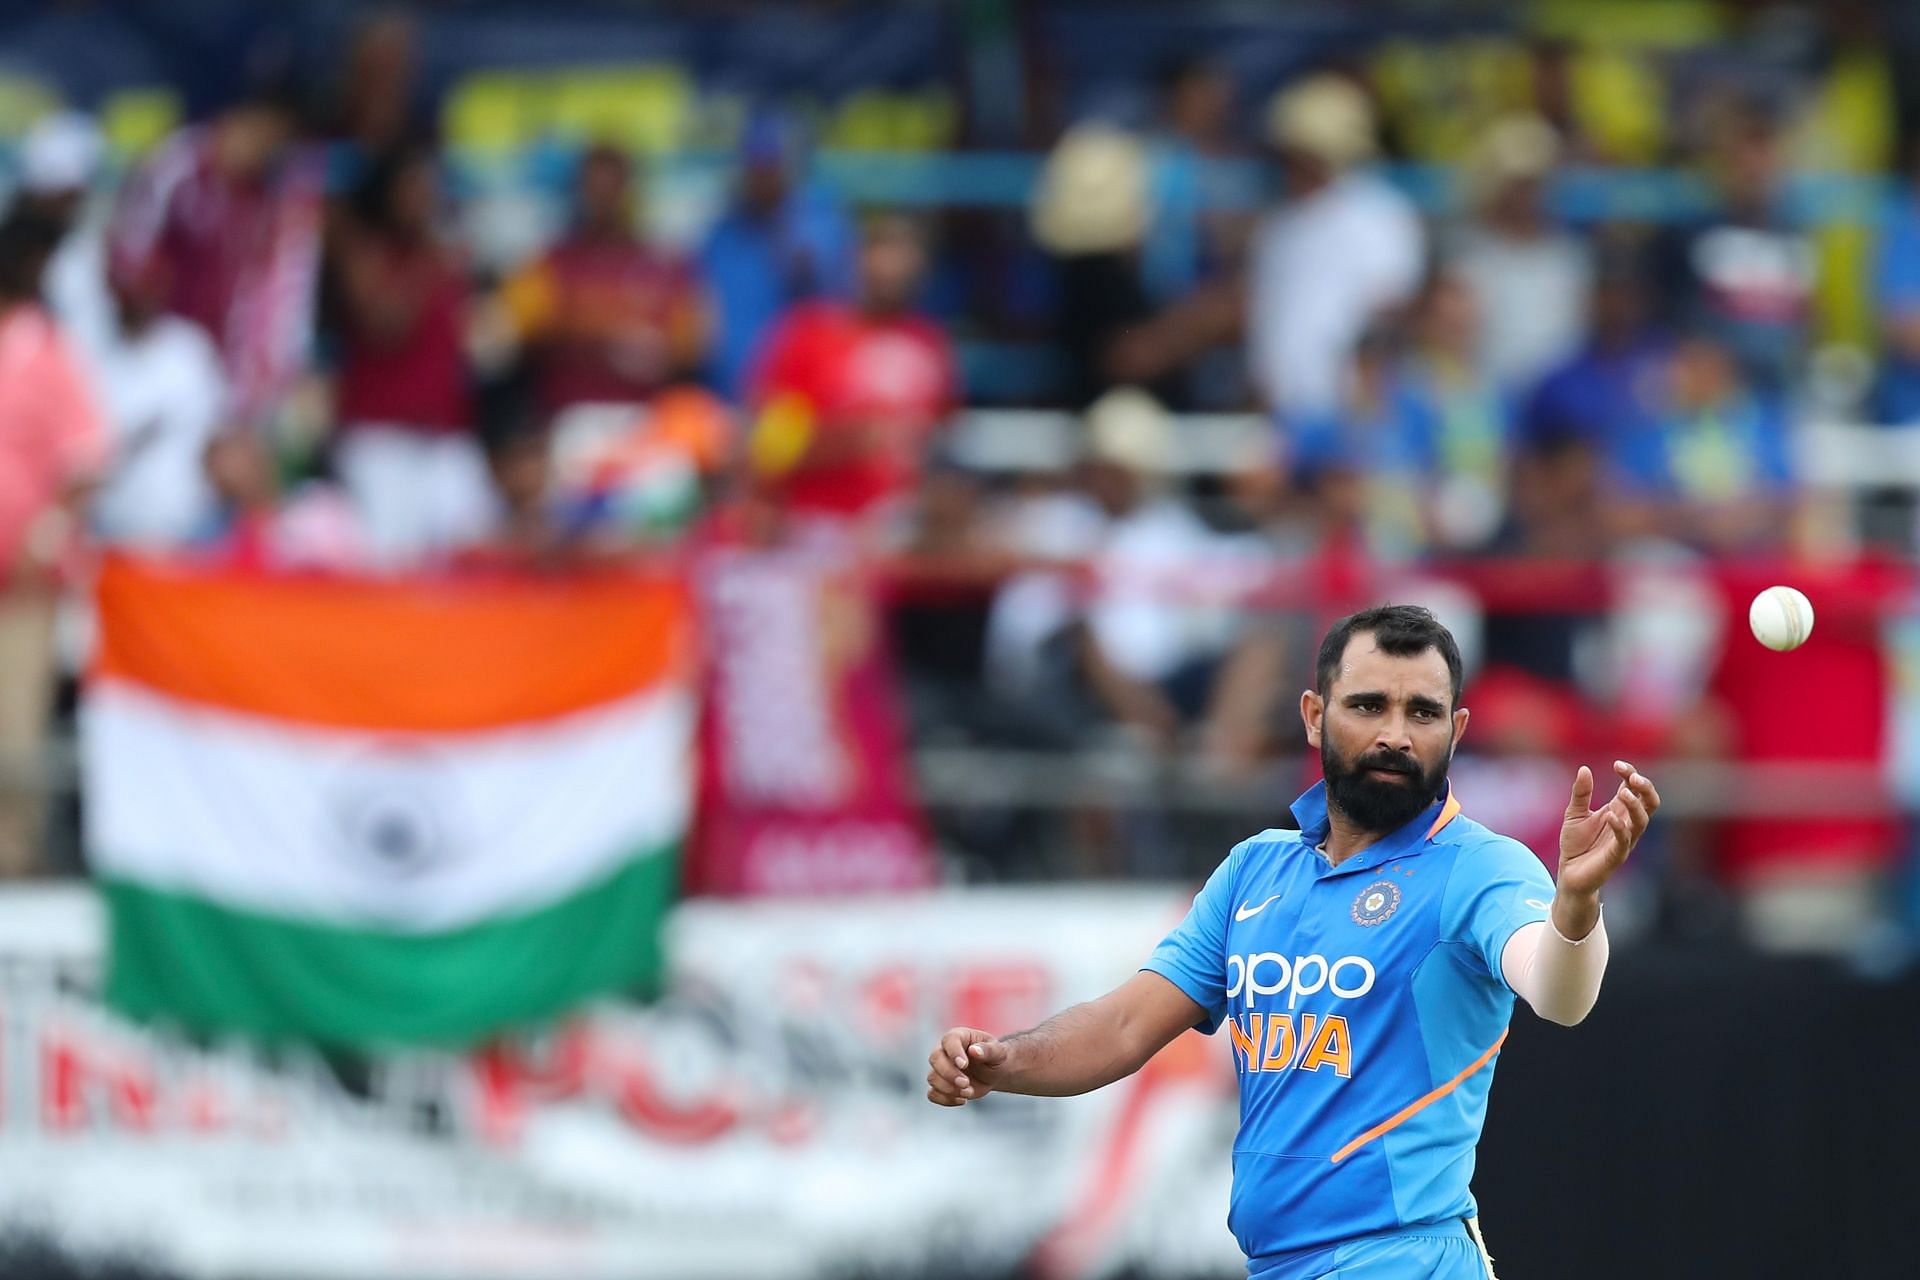 Mohammed Shami took the fewest matches to complete 150 ODI wickets [Getty Images]